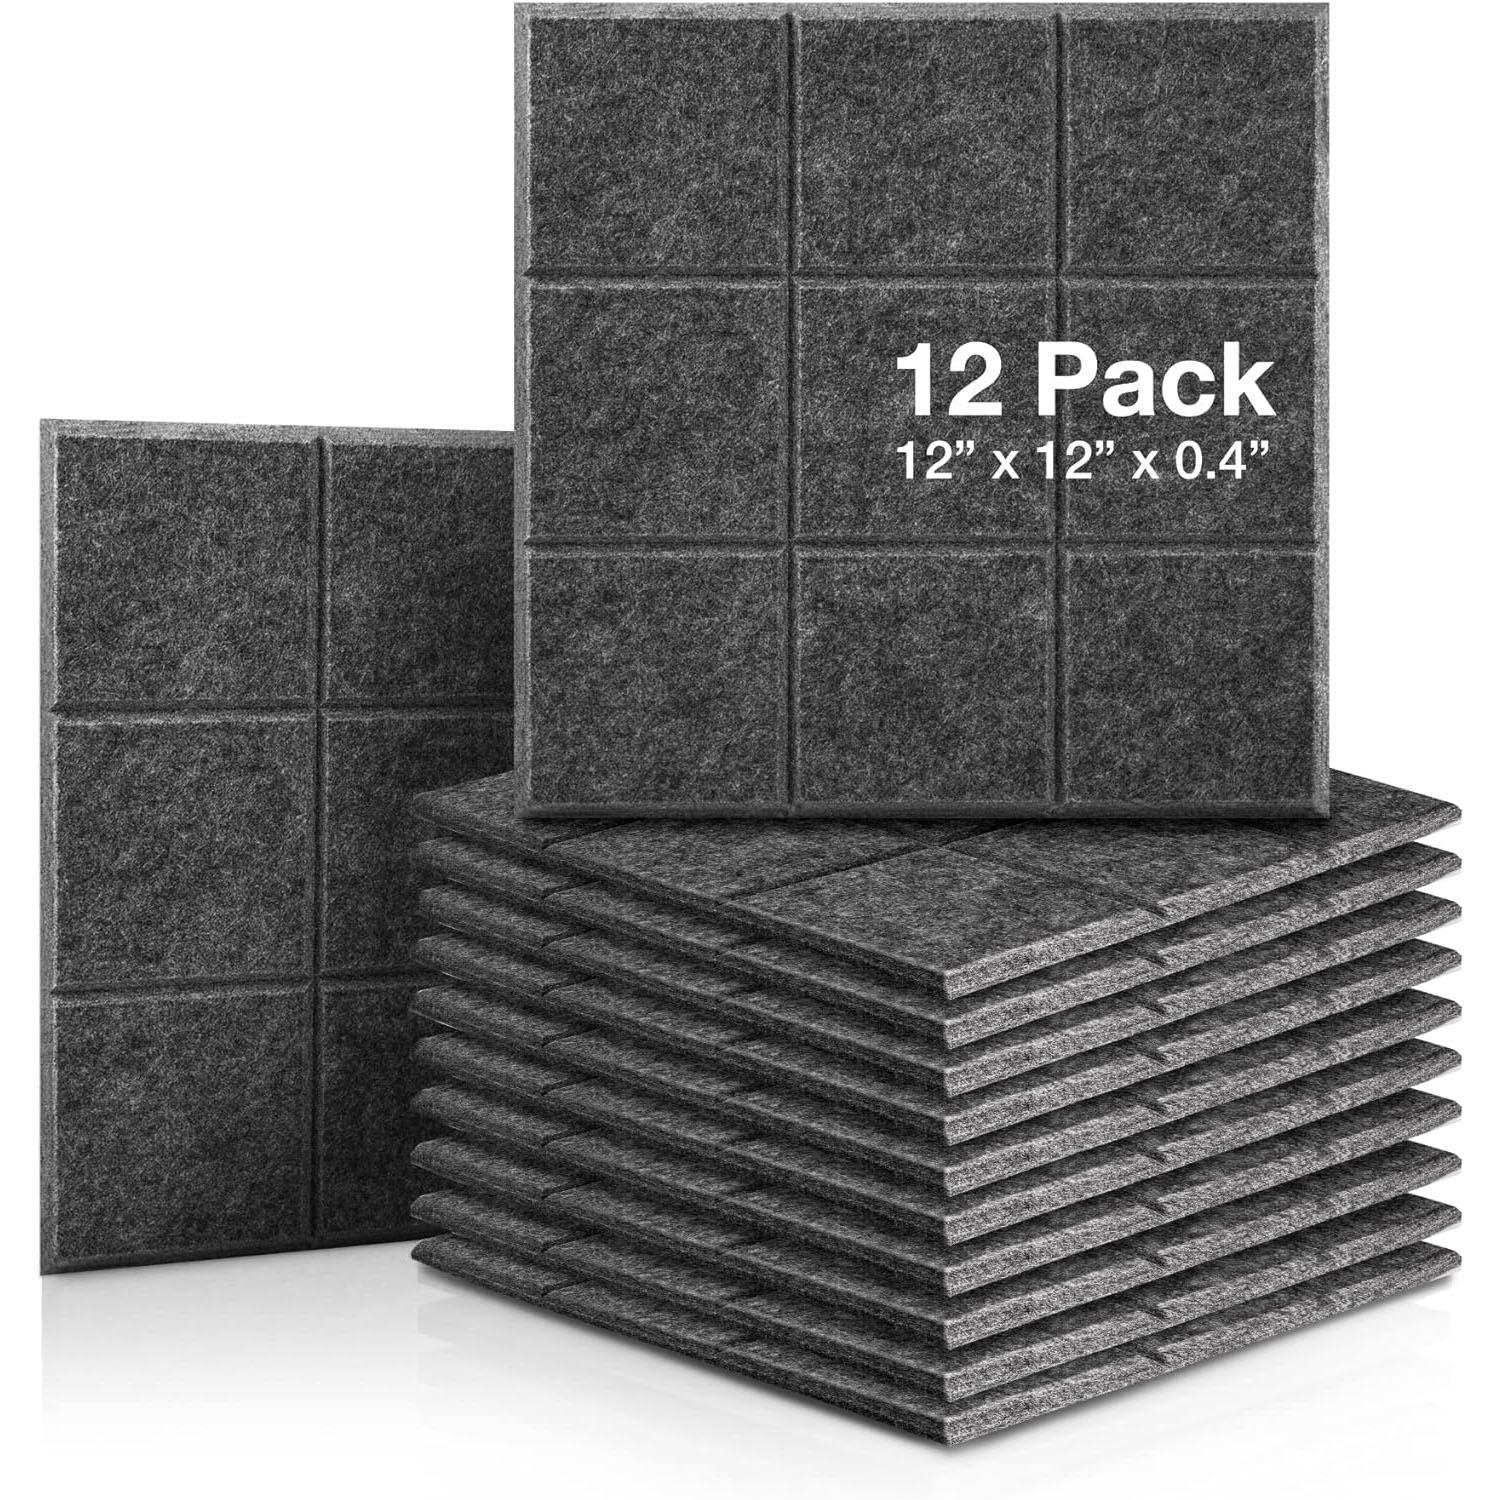 Fstop Labs Acoustic Foam Panels Acoustic Soundproofing Insulation for $13.20